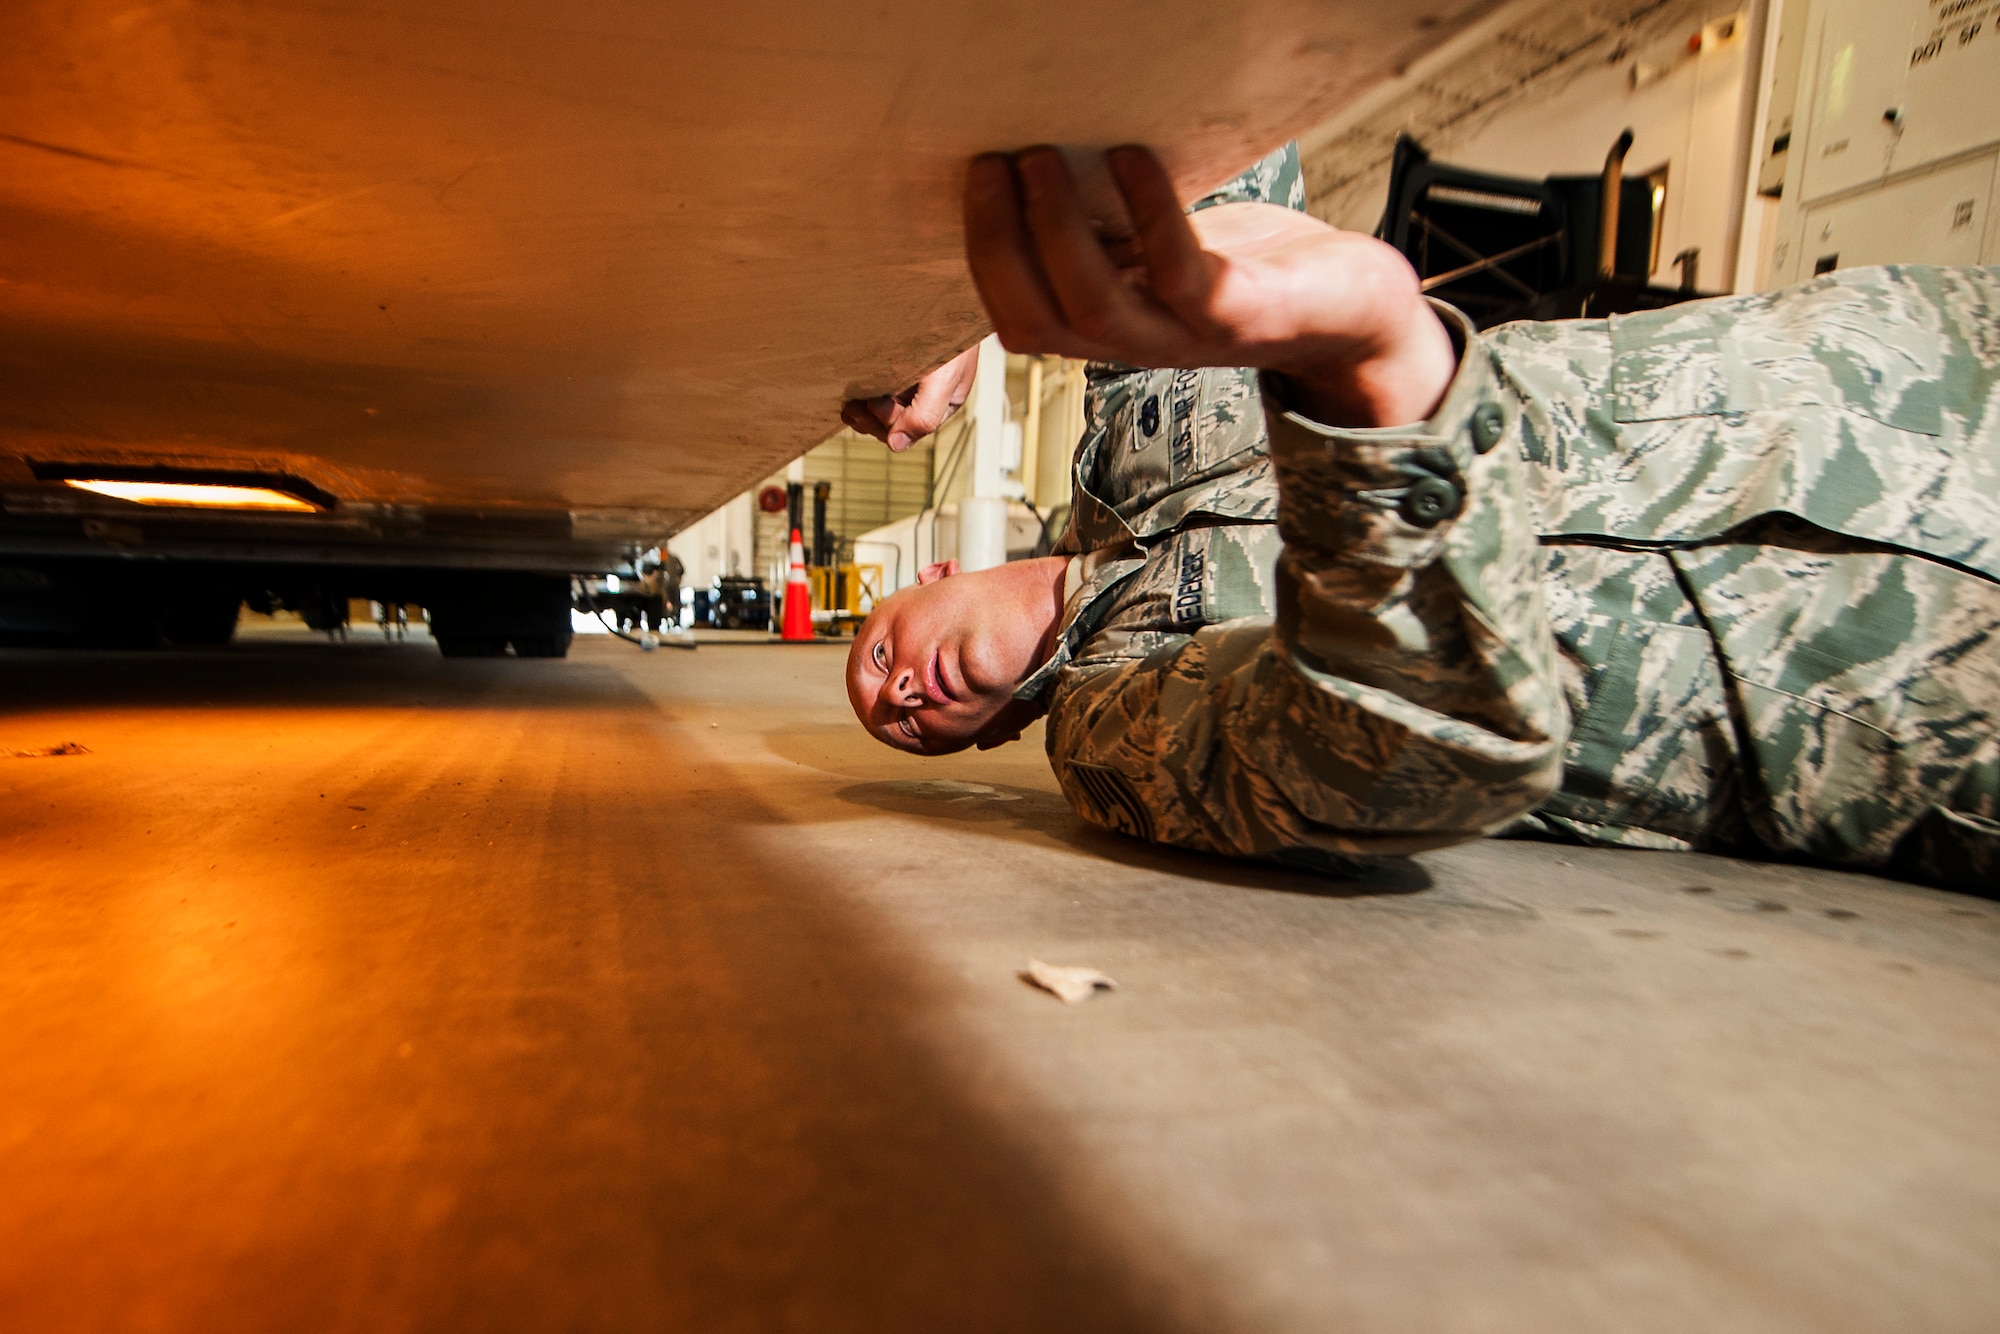 Tech. Sgt. Carl Snedeker, 91st Maintenance Group facility maintenance section site supervisor, inspects a payload transport trailer’s lights during Global Strike Challenge training at Minot Air Force Base, N.D., May 31, 2017. Snedeker is an alternate technician for the three-member PREL crew for GSC 17. (U.S. Air Force photo/Senior Airman J.T. Armstrong)